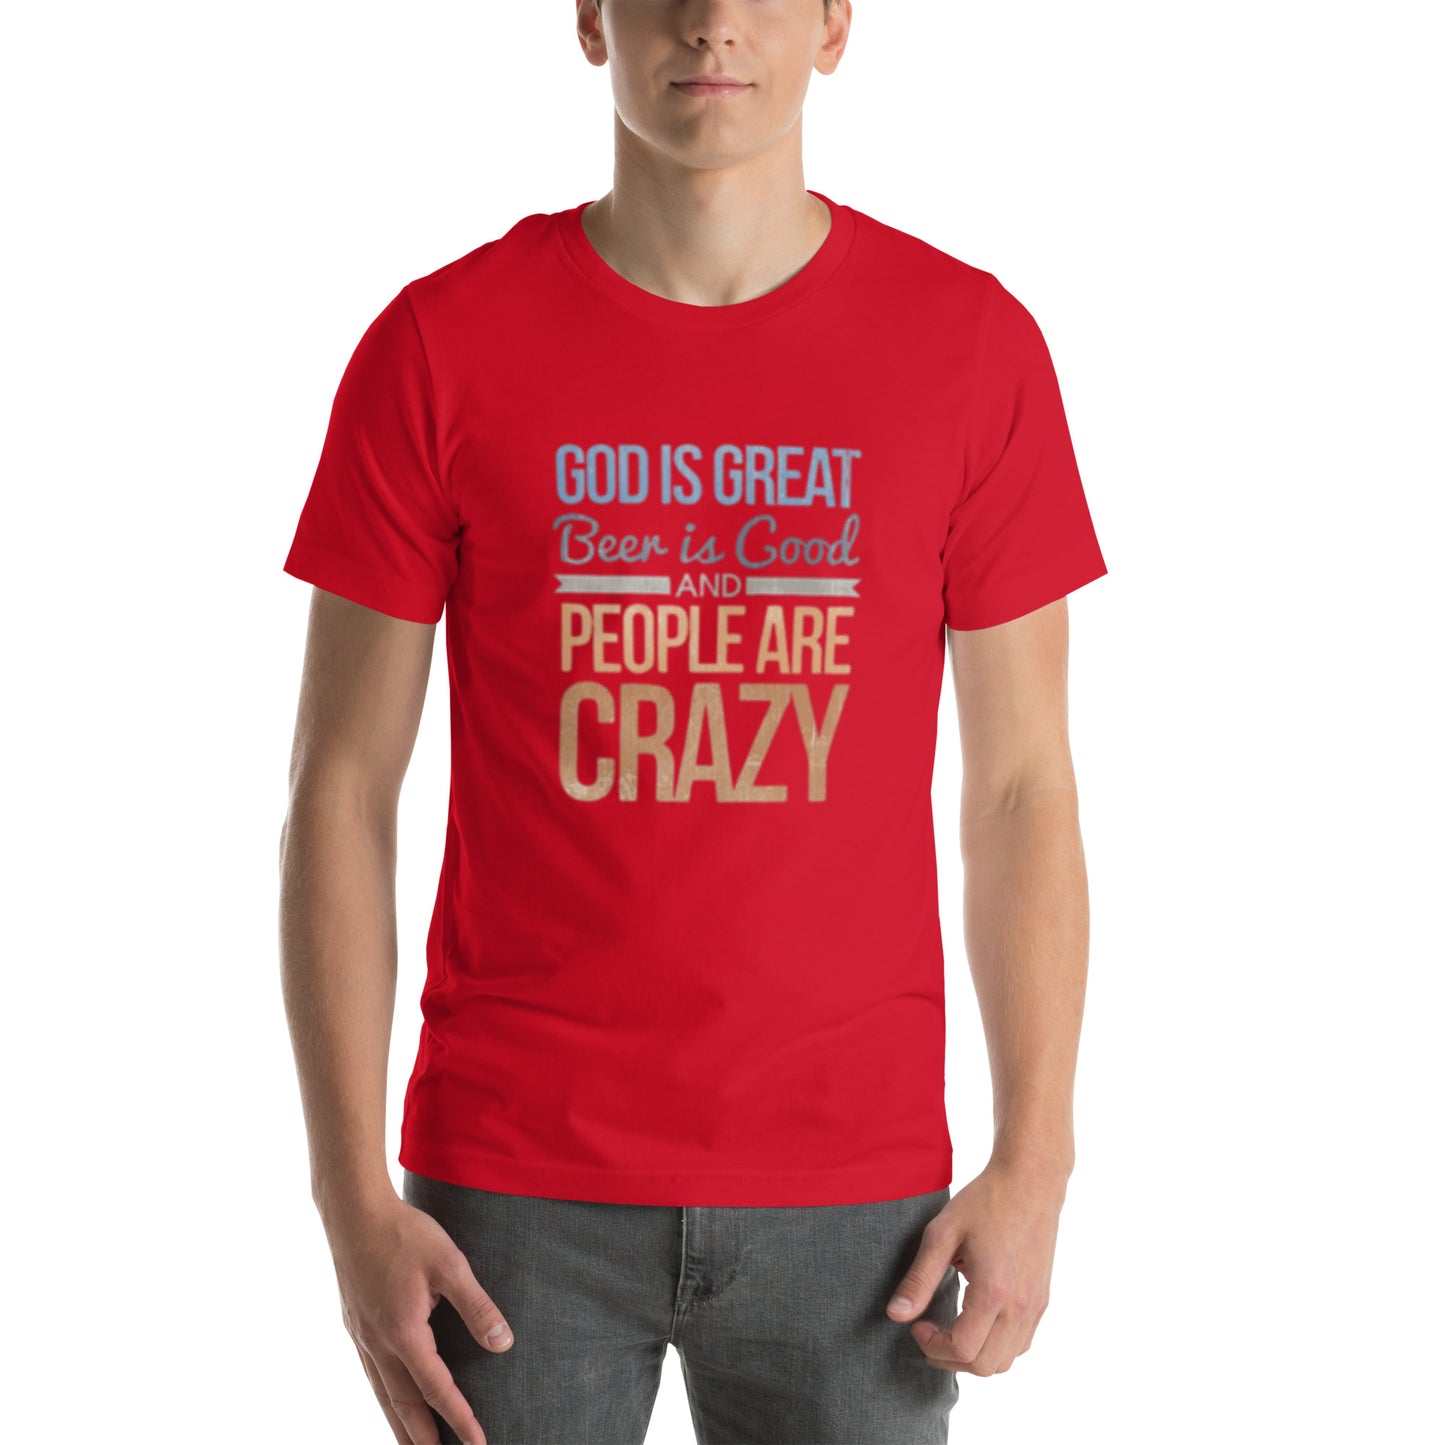 People Are Crazy - Classic Country Tees